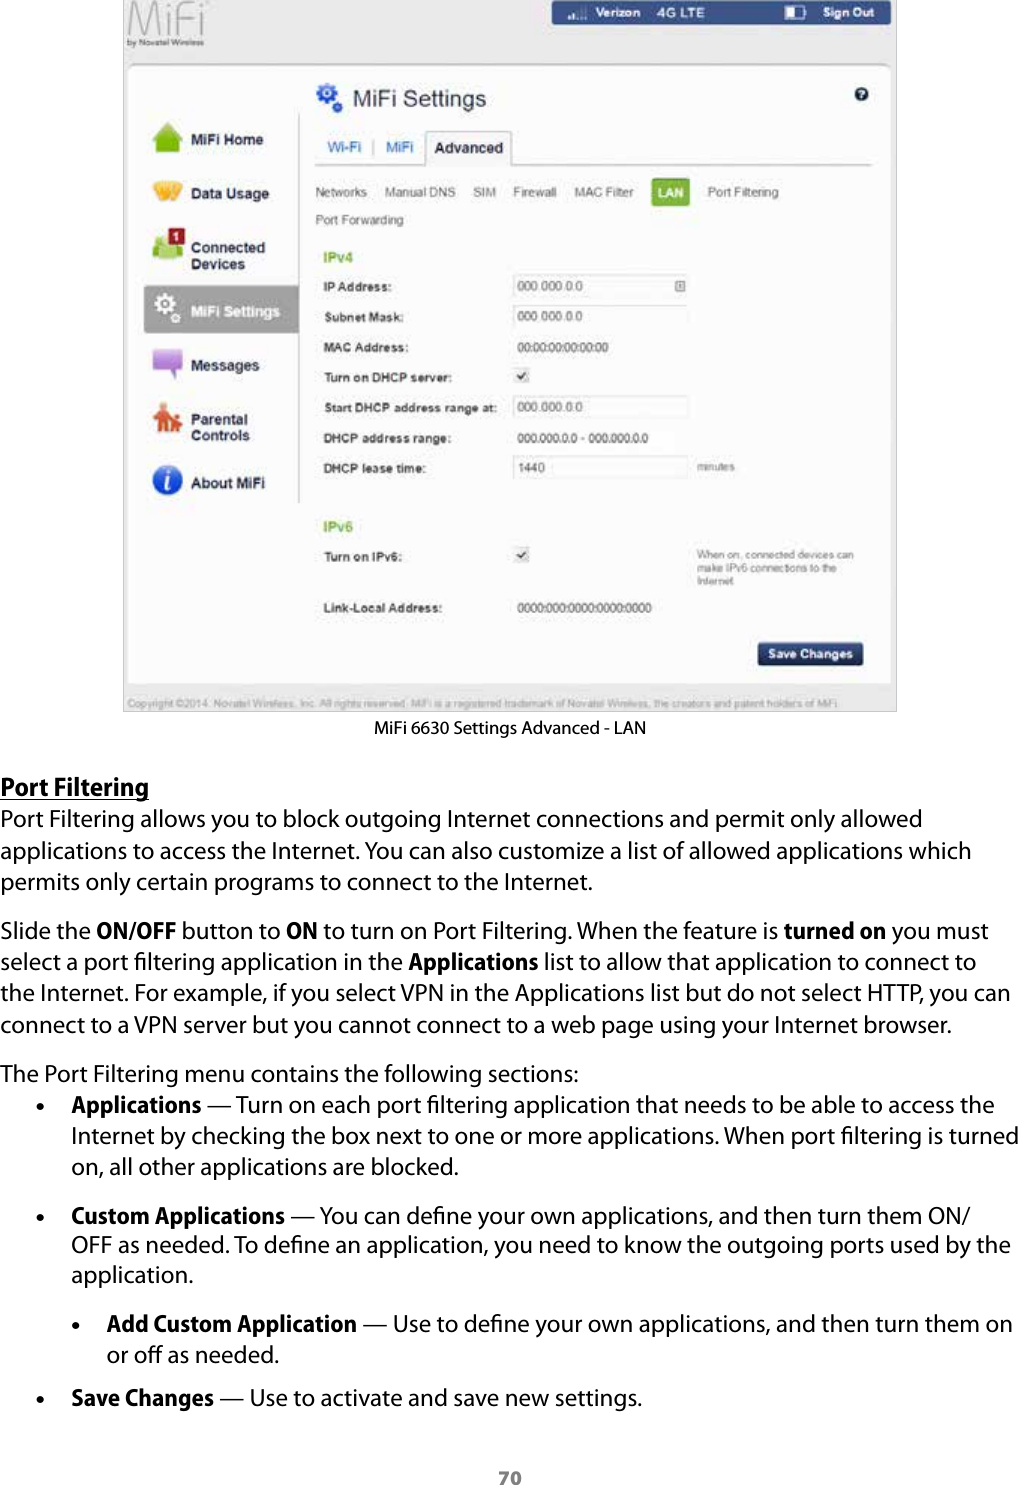 70MiFi 6630 Settings Advanced - LANPort FilteringPort Filtering allows you to block outgoing Internet connections and permit only allowed applications to access the Internet. You can also customize a list of allowed applications which permits only certain programs to connect to the Internet. Slide the ON/OFF button to ON to turn on Port Filtering. When the feature is turned on you must select a port ltering application in the Applications list to allow that application to connect to the Internet. For example, if you select VPN in the Applications list but do not select HTTP, you can connect to a VPN server but you cannot connect to a web page using your Internet browser. The Port Filtering menu contains the following sections: •Applications — Turn on each port ltering application that needs to be able to access theInternet by checking the box next to one or more applications. When port ltering is turnedon, all other applications are blocked. •Custom Applications — You can dene your own applications, and then turn them ON/OFF as needed. To dene an application, you need to know the outgoing ports used by theapplication. •Add Custom Application — Use to dene your own applications, and then turn them onor o as needed. •Save Changes — Use to activate and save new settings.